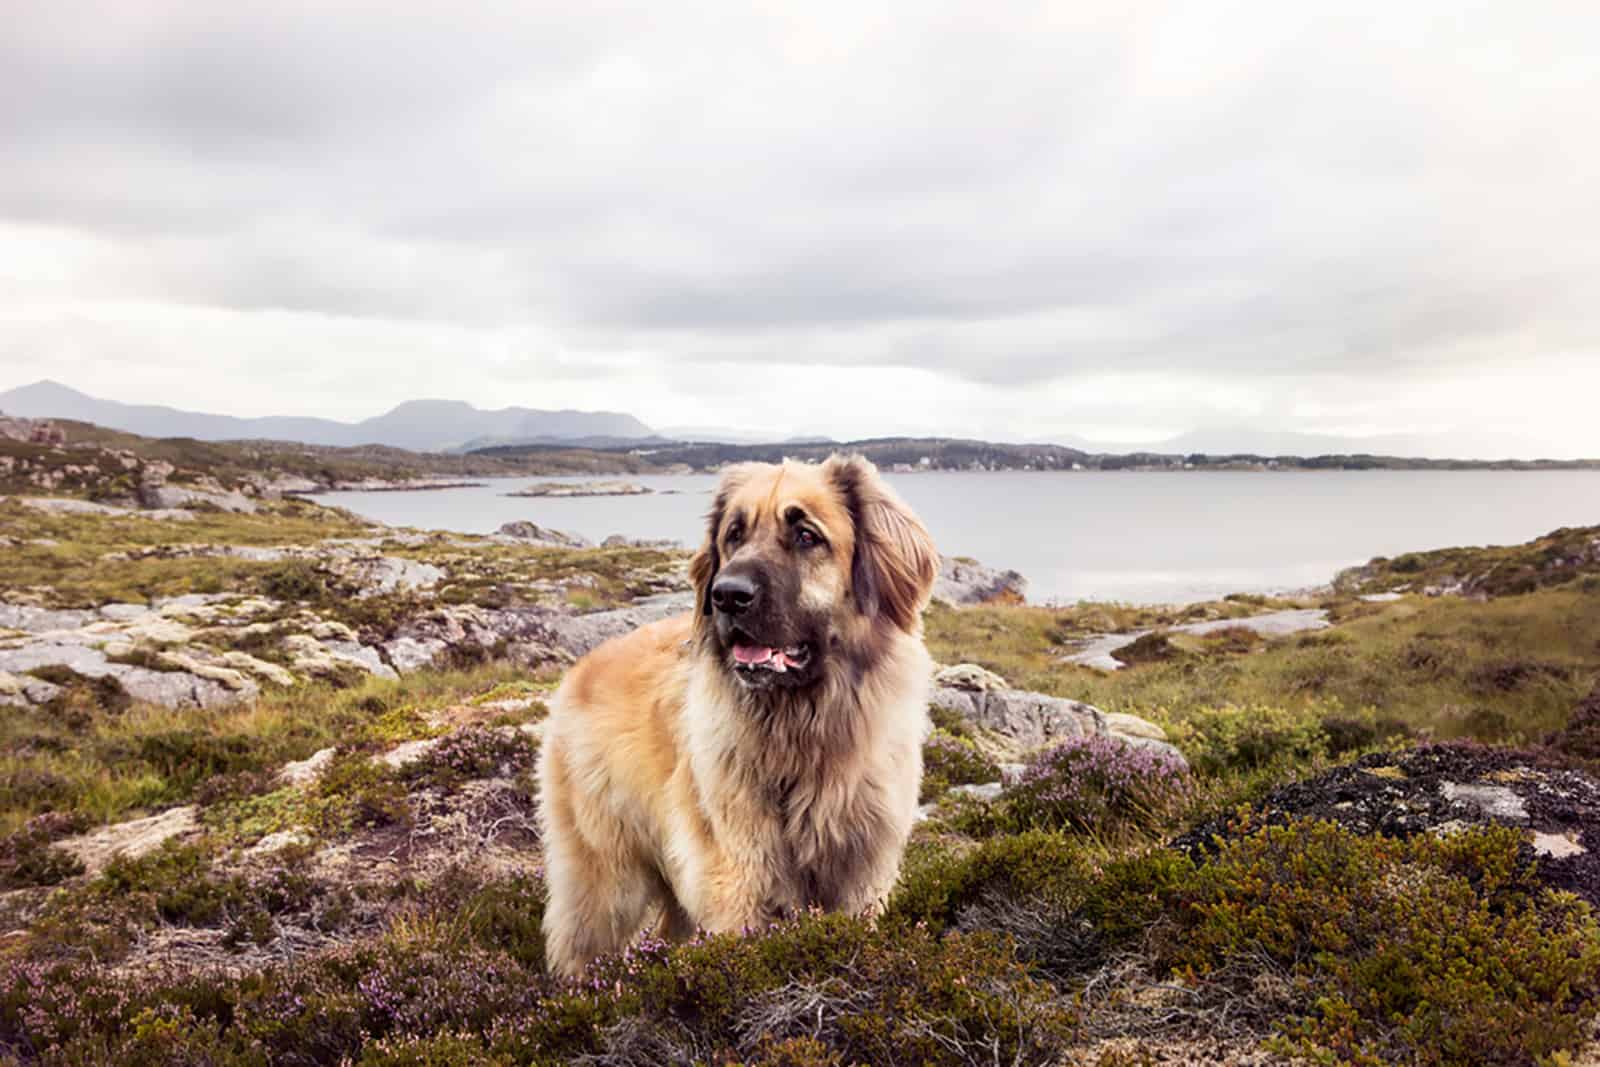 leonberger dog standing in nature